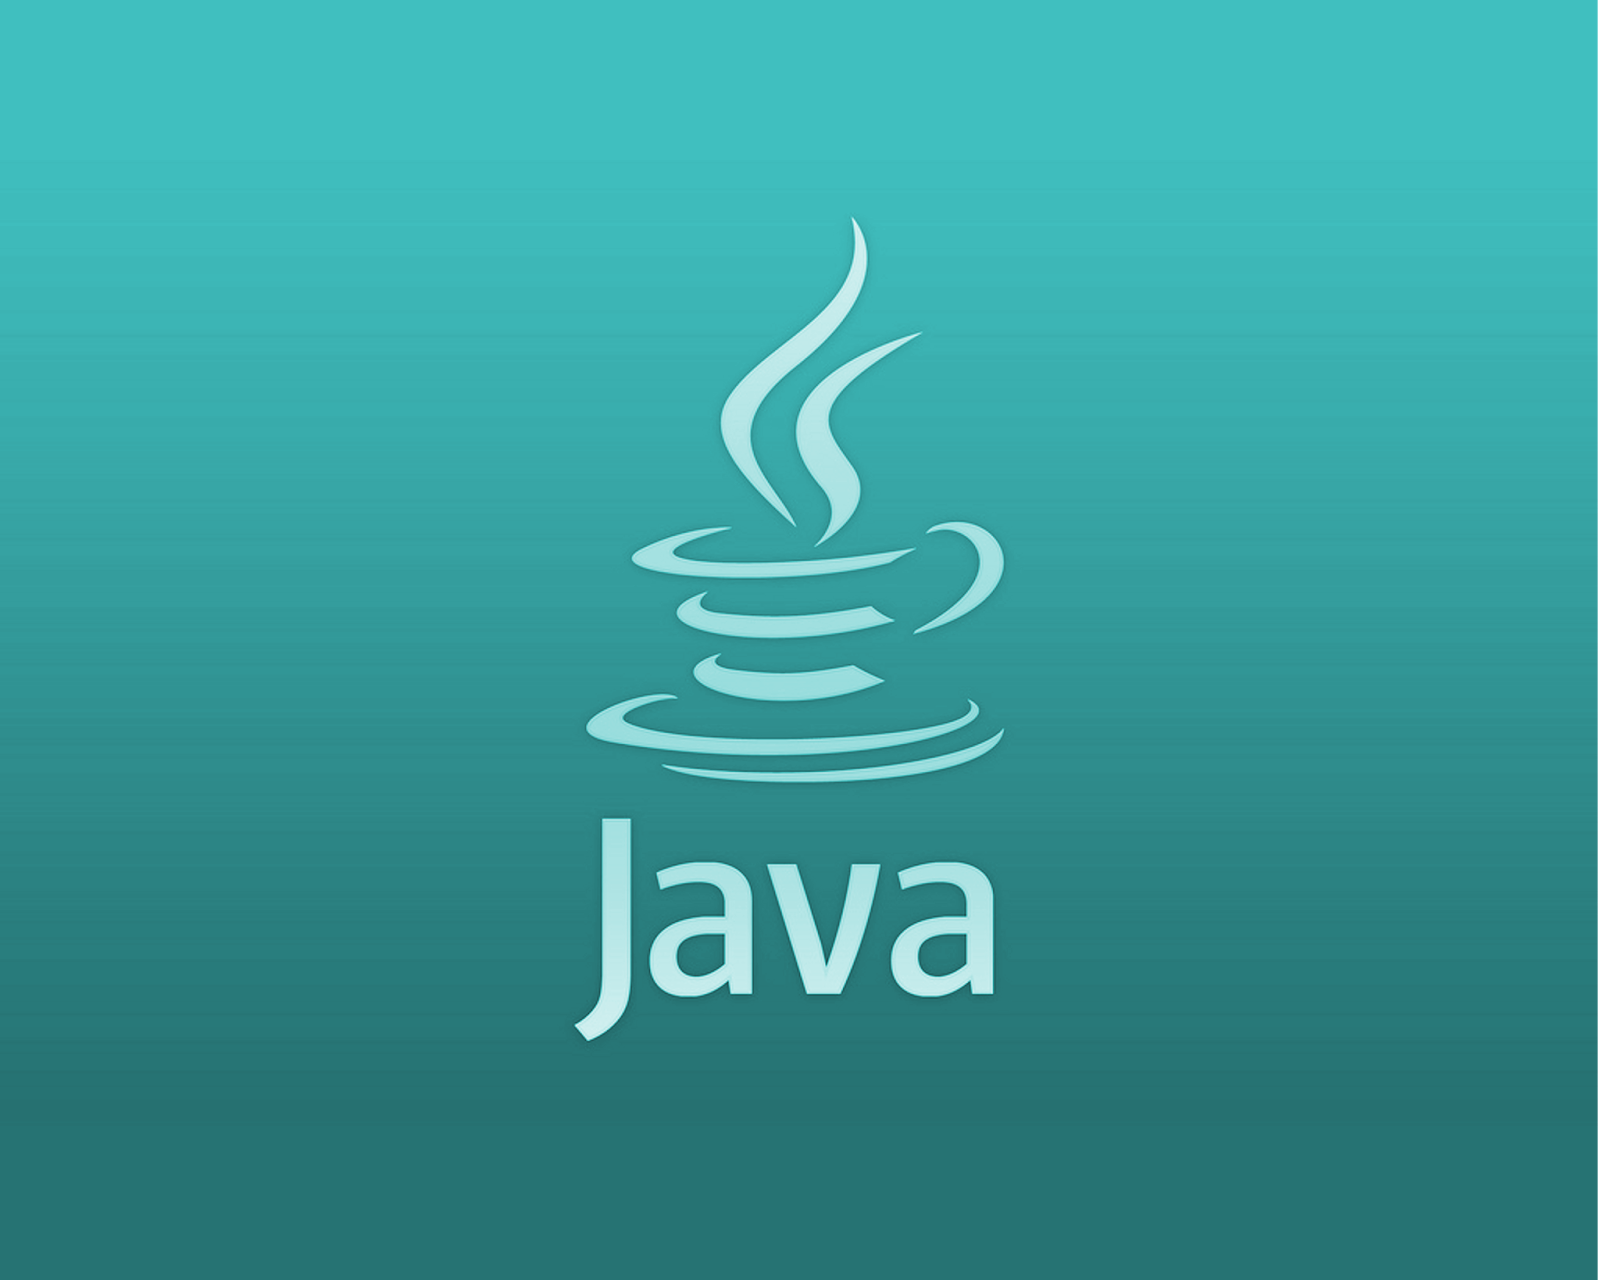 is-java-compiled-or-interpreted-programming-language